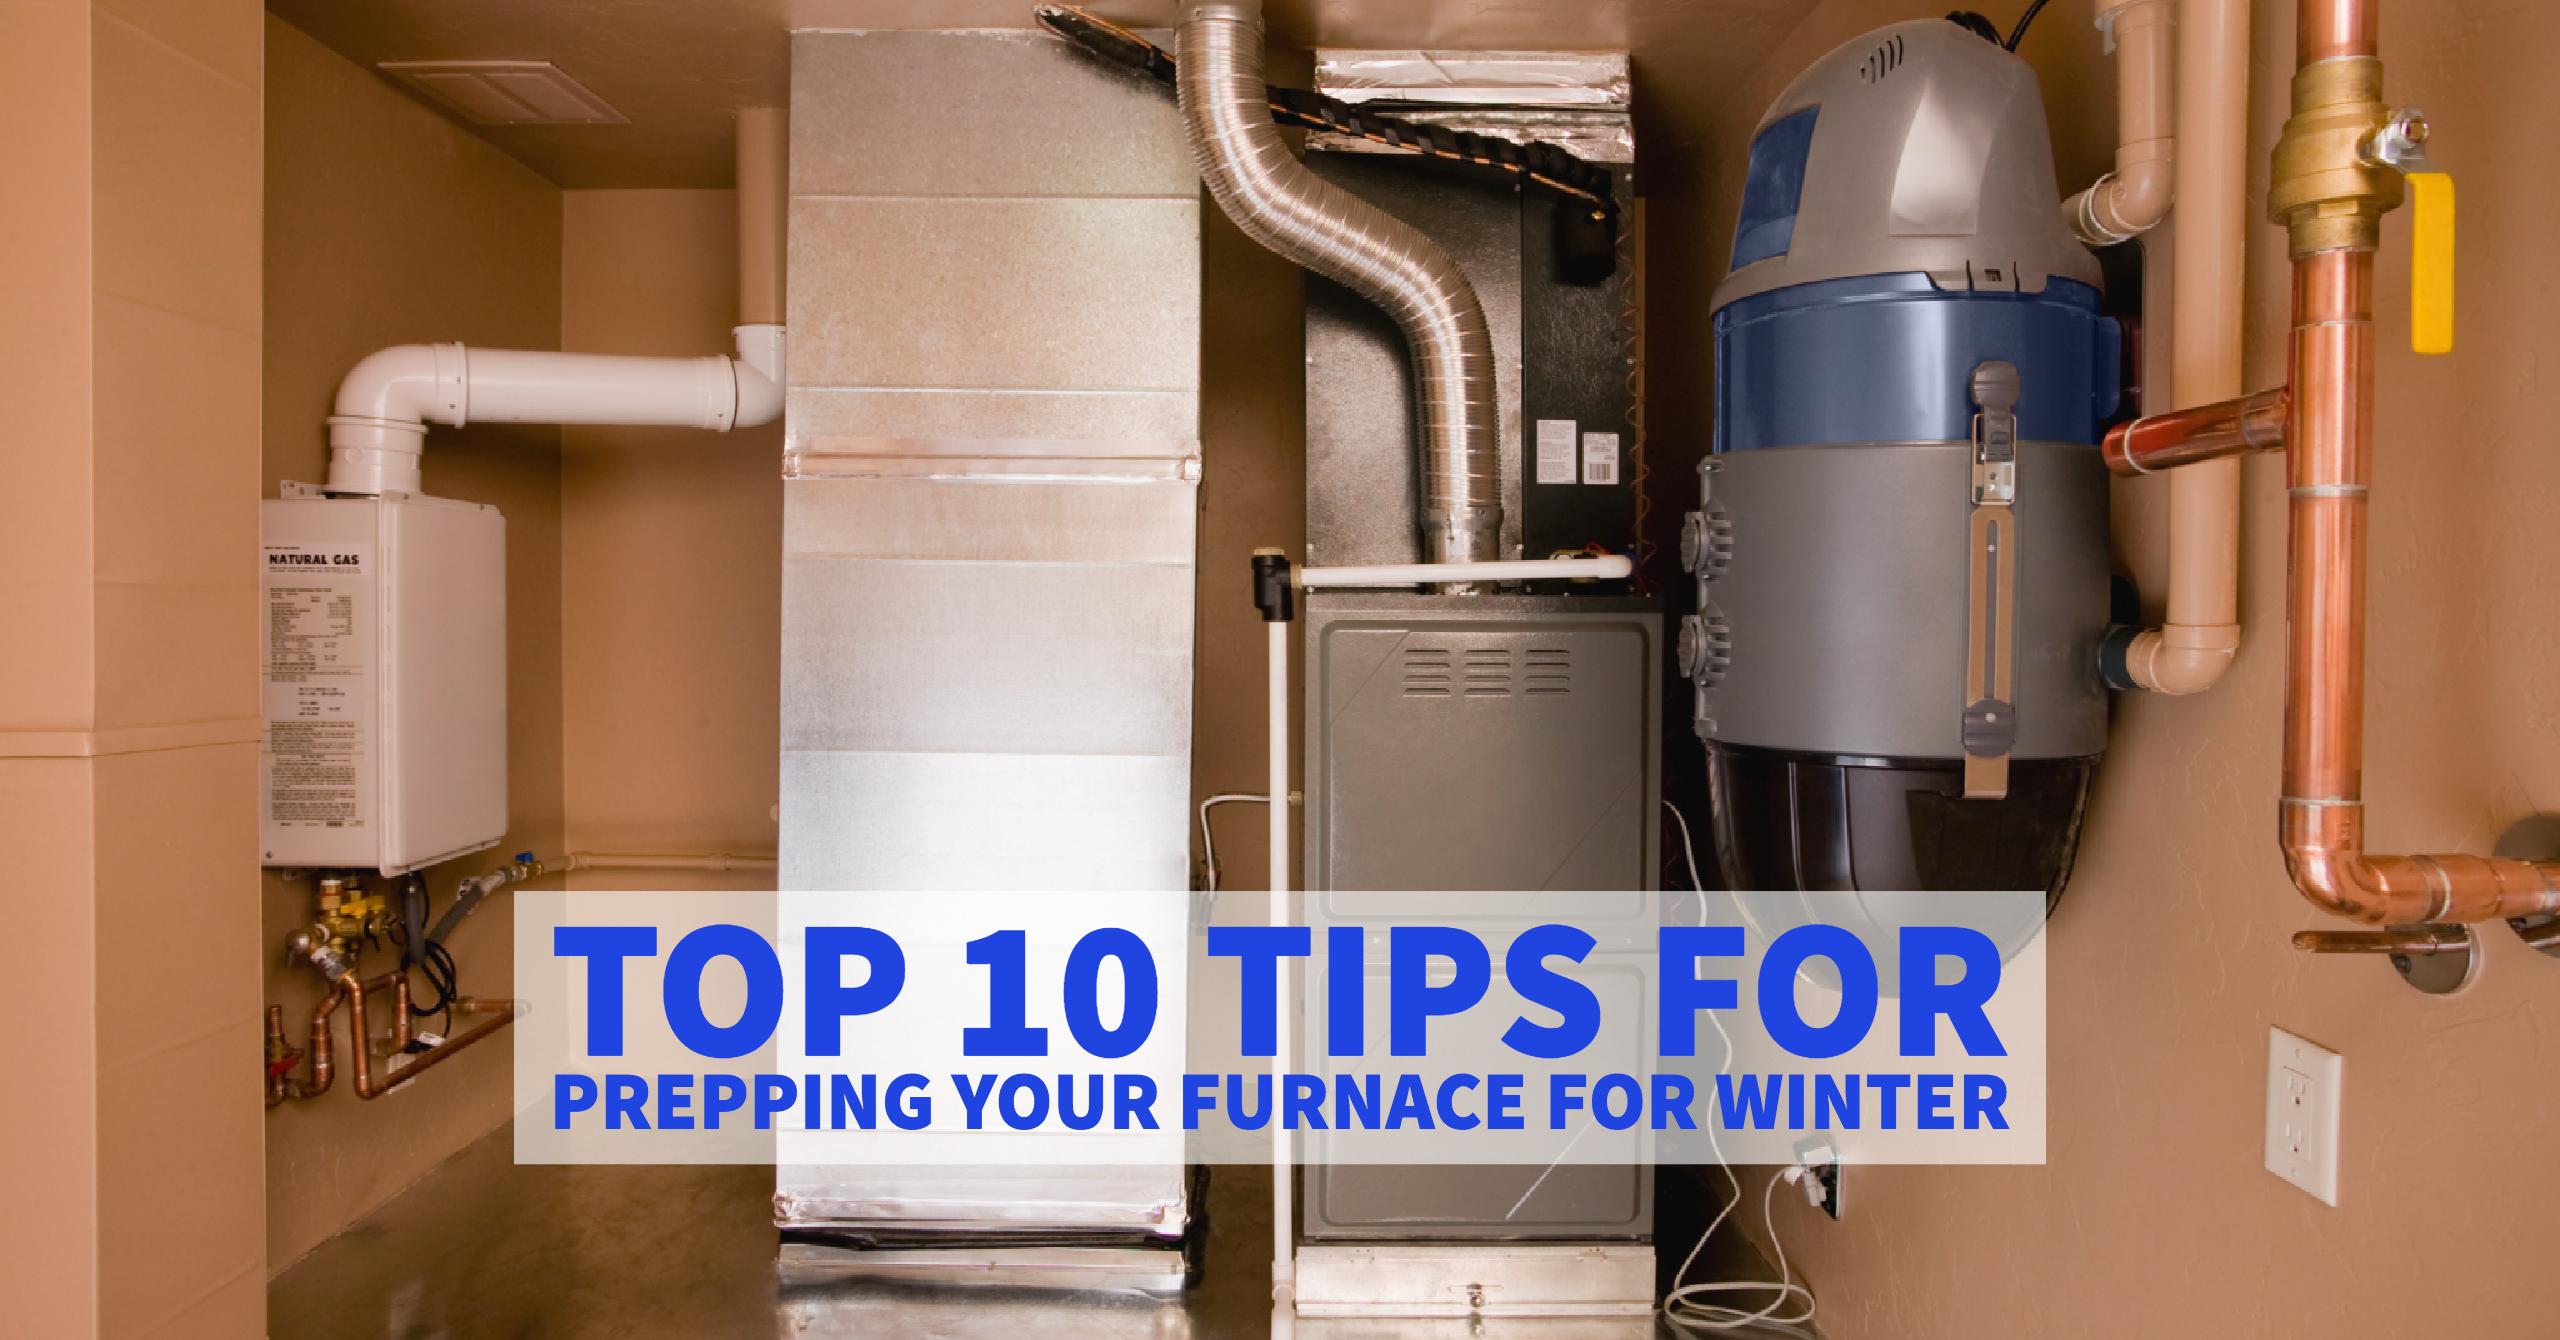 10 Tips for Prepping Your Furnace for Winter